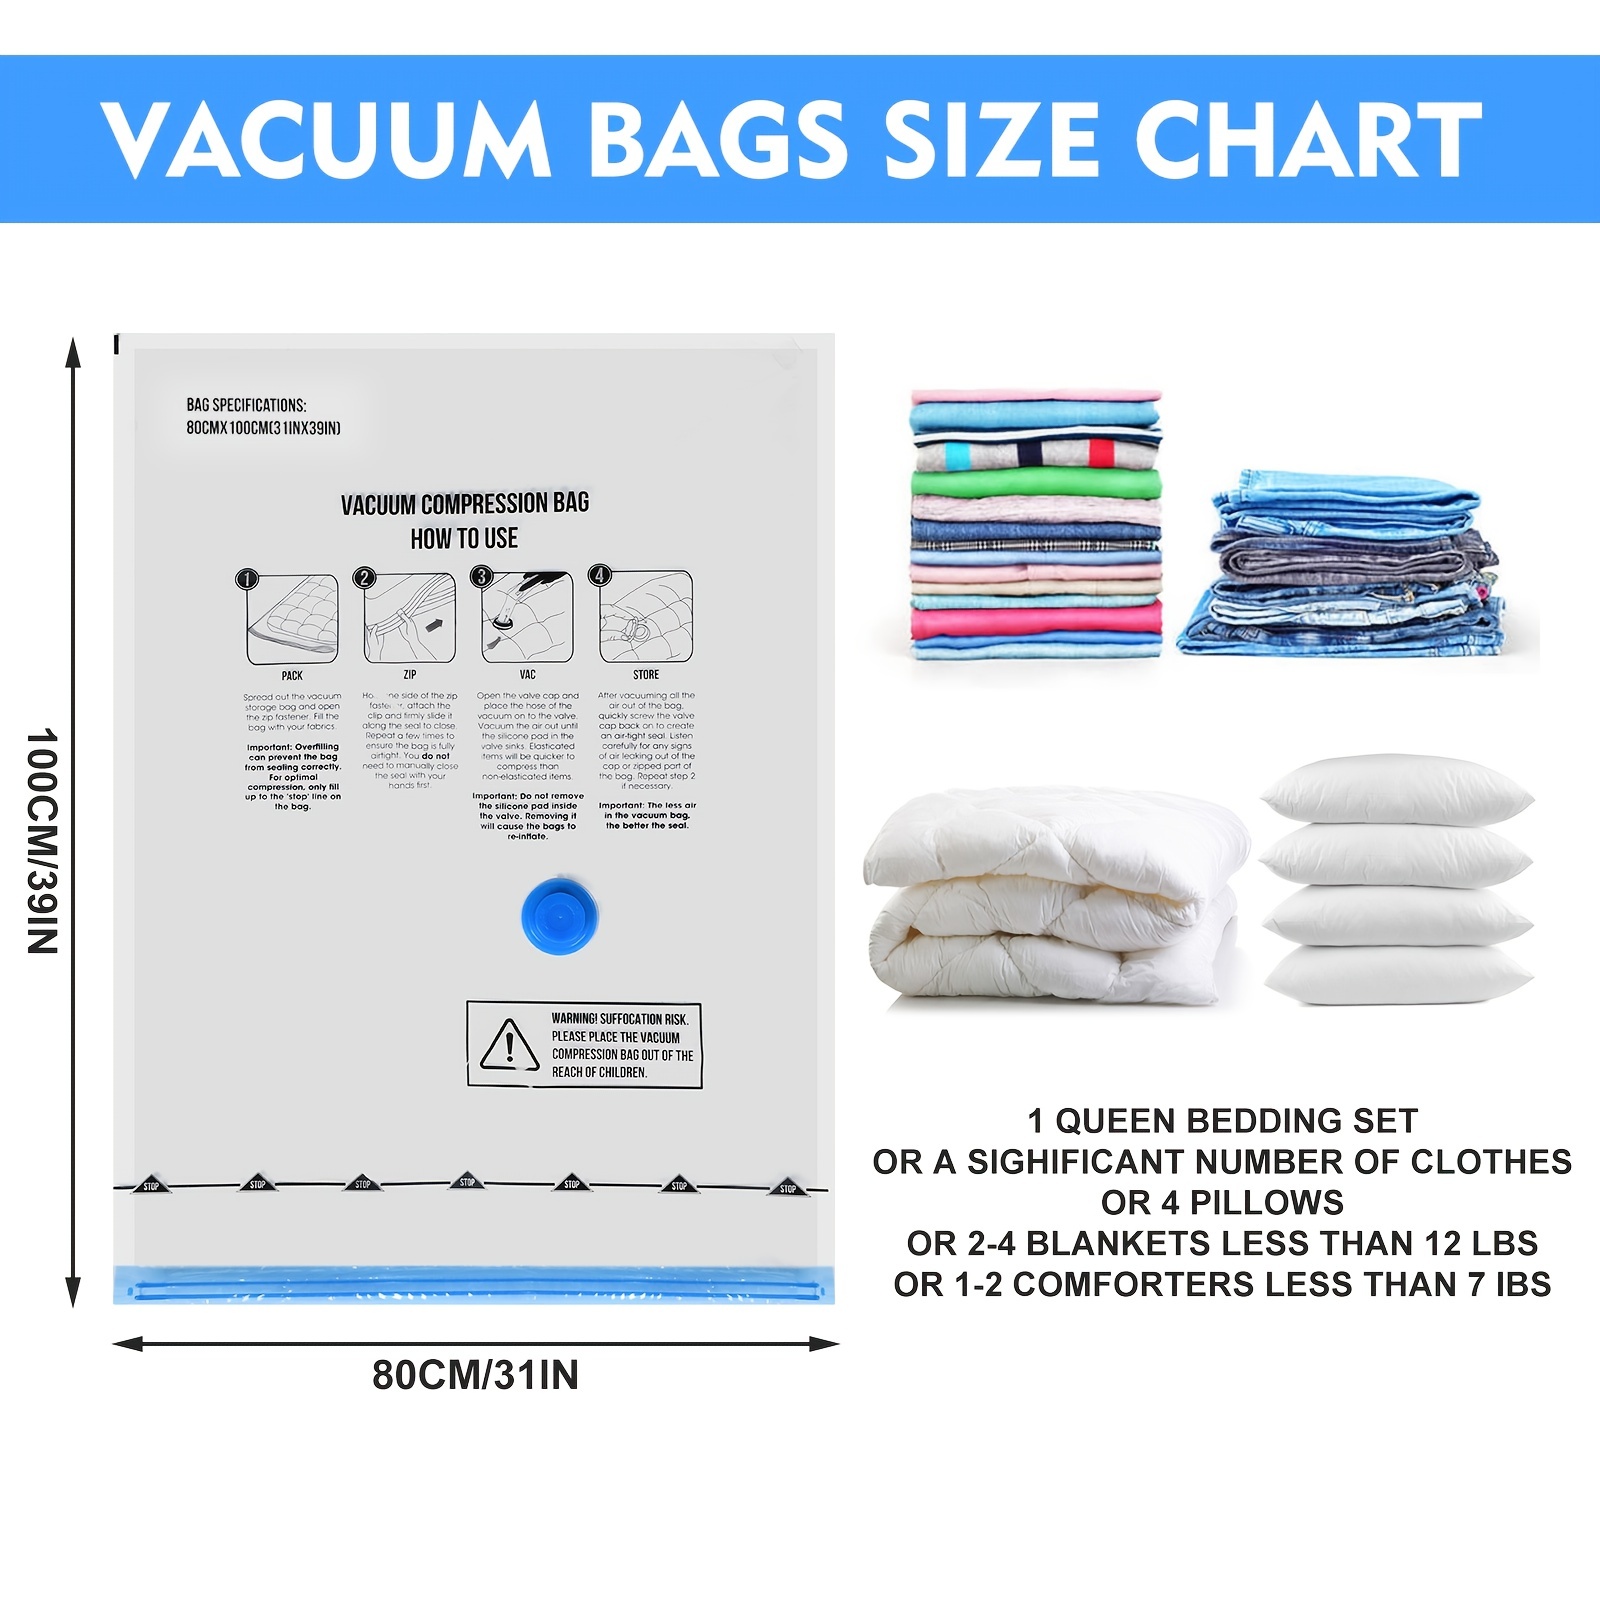 Vacuum Storage Bag For Home Use - A Space Saving Solution For Storing  Blankets, Clothing, And Bedding. This Compression Bag Comes With A Built-in  Electric Pump And Is Ideal For Travel Or